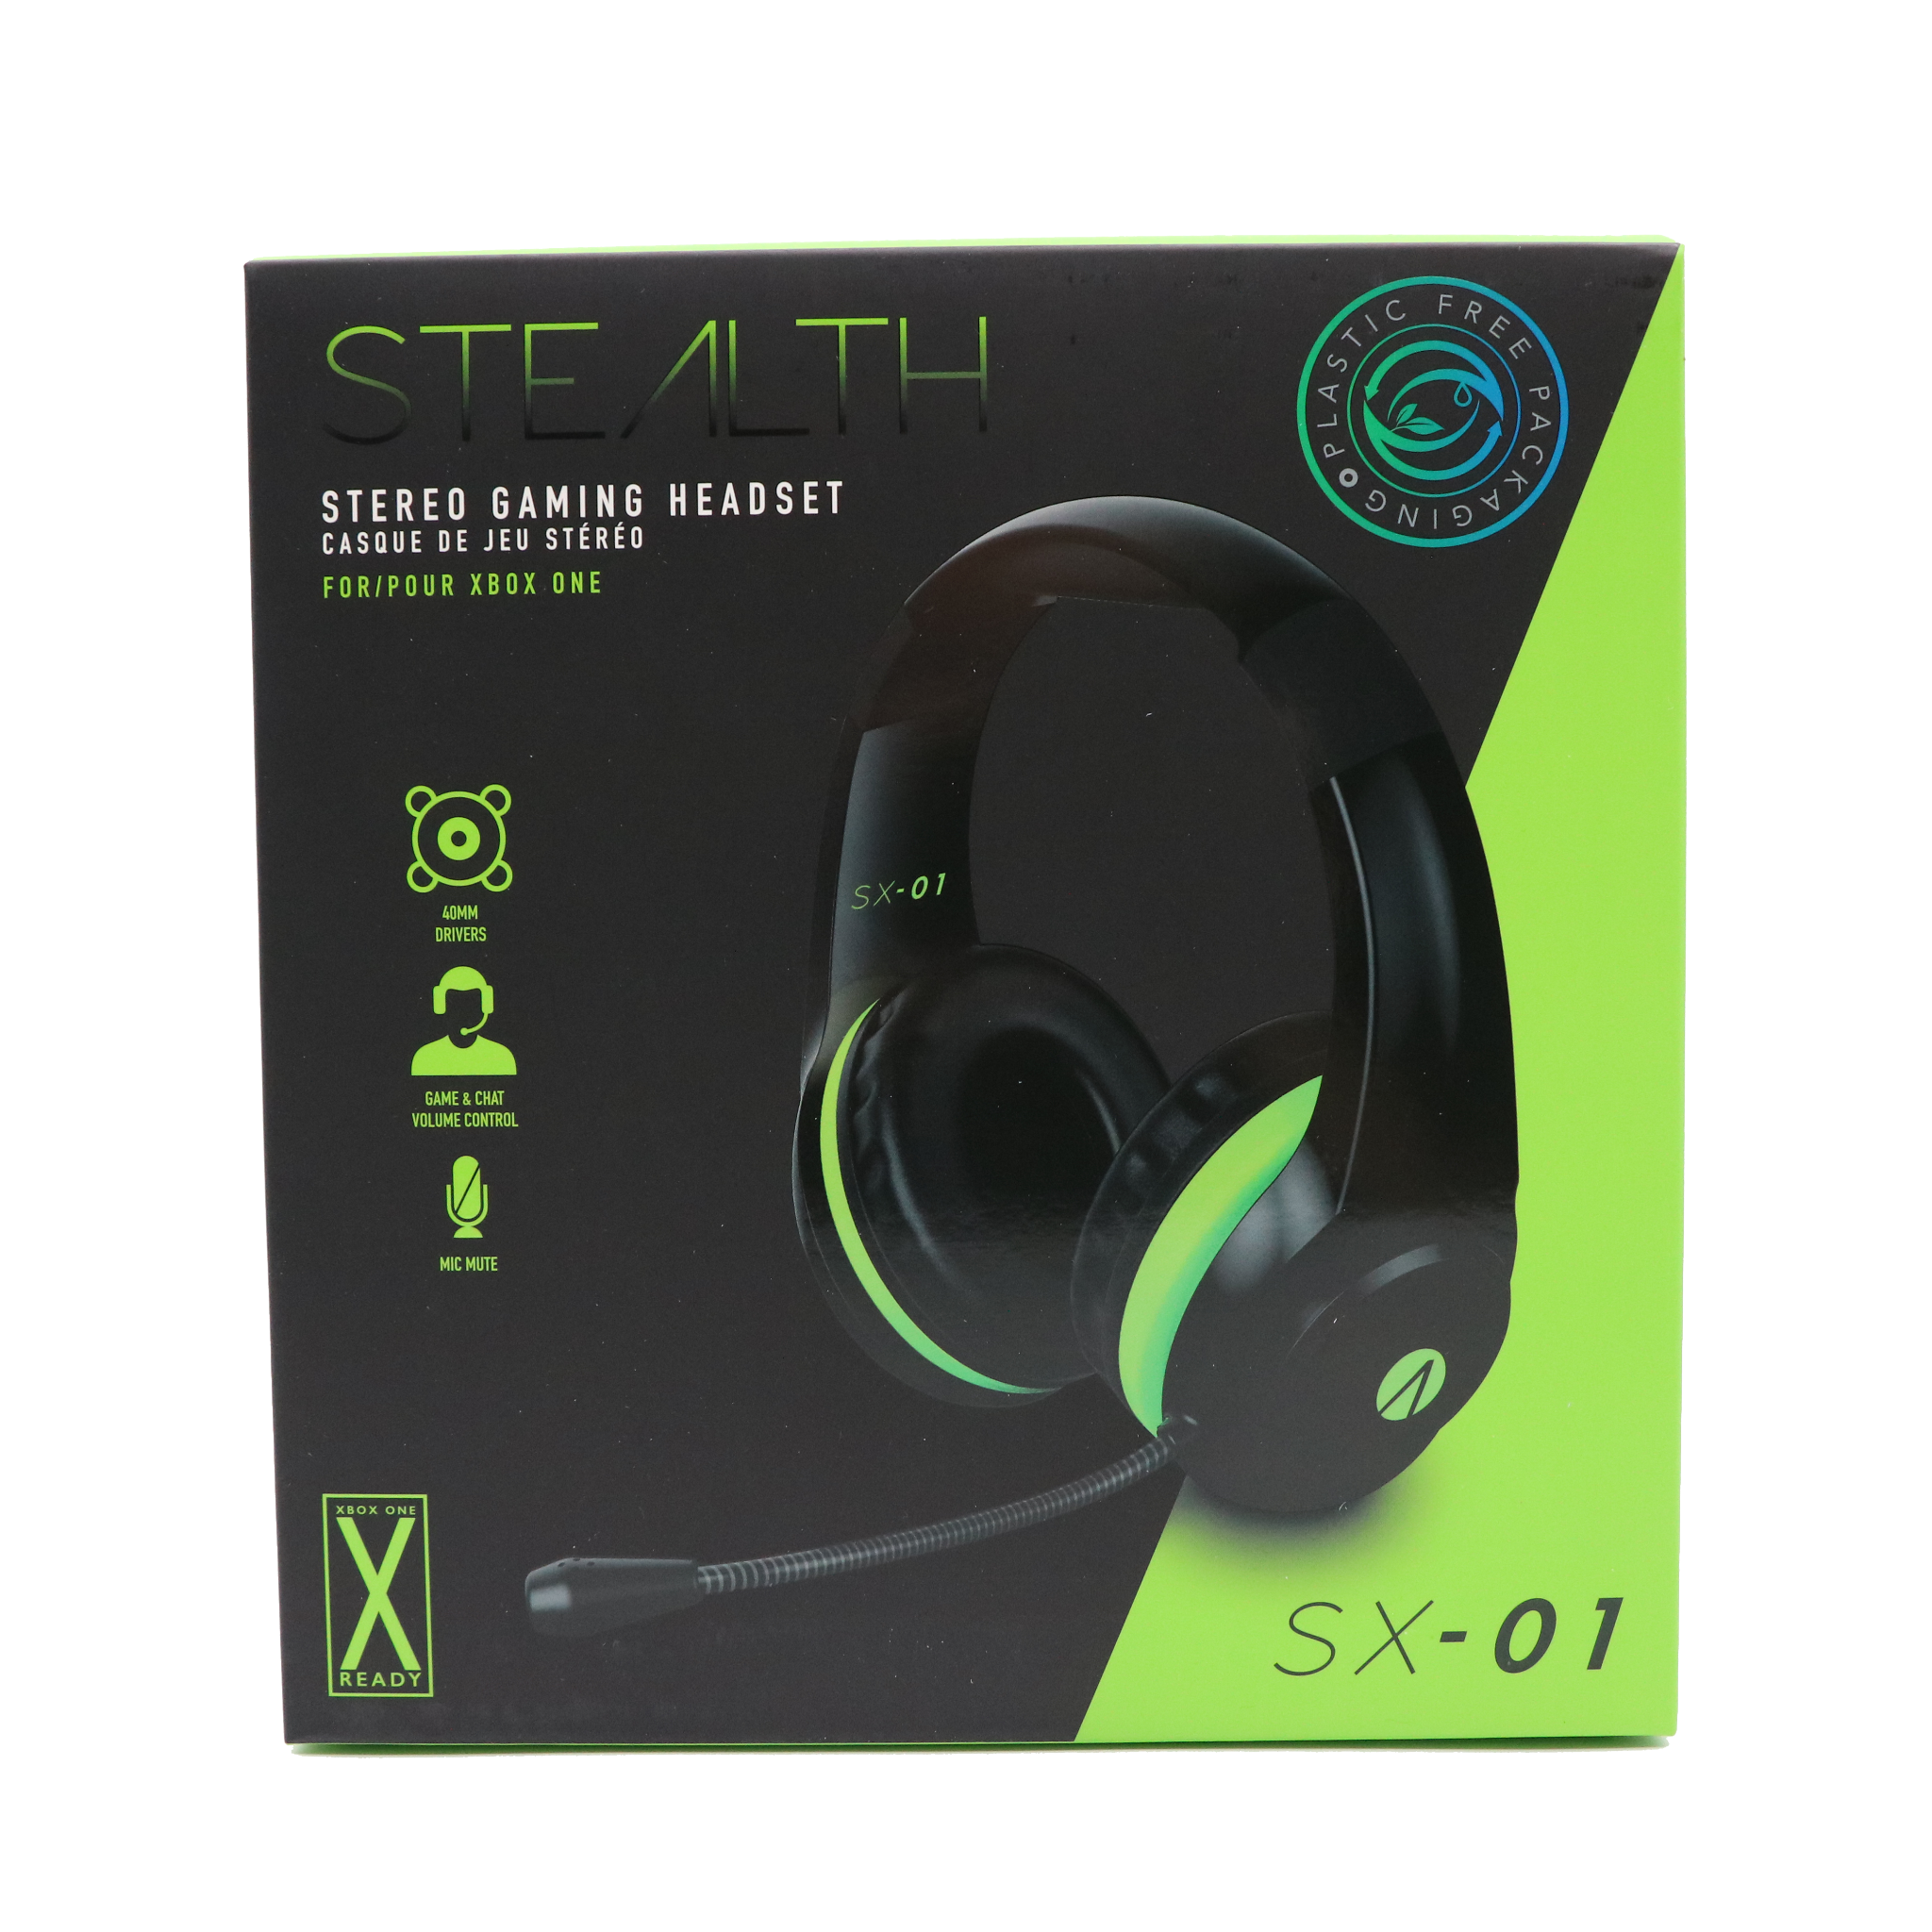 Headset Gaming – Stereo Wired Xbox Stealth P Microsoft For InSpireVideoGames One/S/X SX-01